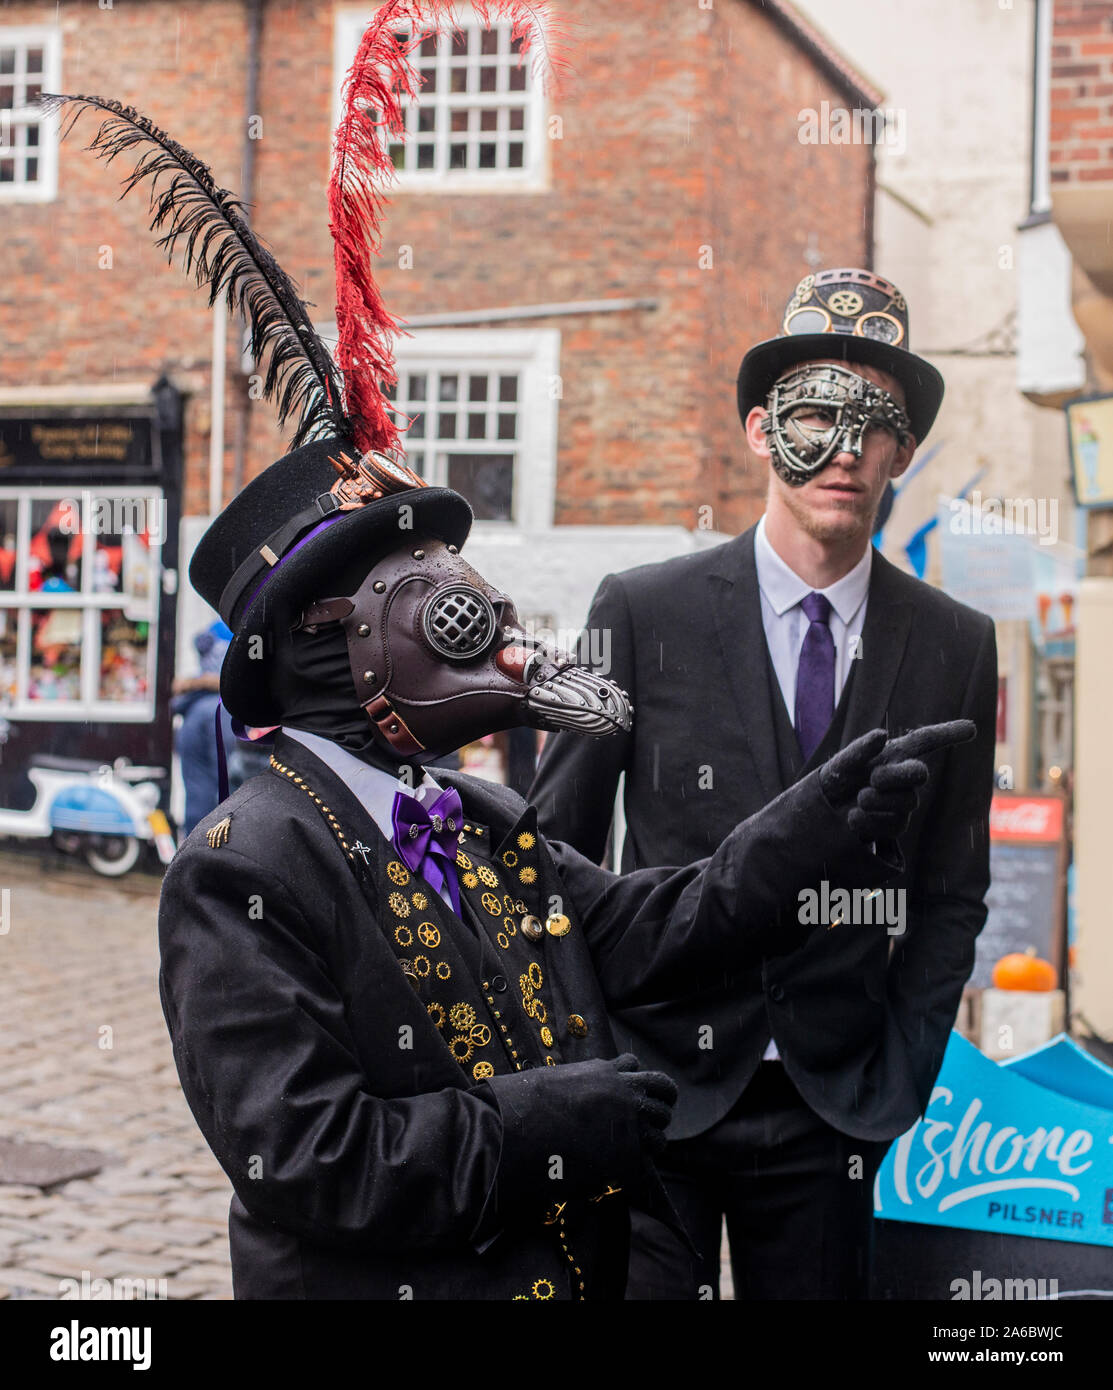 Two young Goths in traditional costumes, Whitby Goth Weekend Festival, Whitby, North Yorkshire, UK, 25 October 2019 Stock Photo